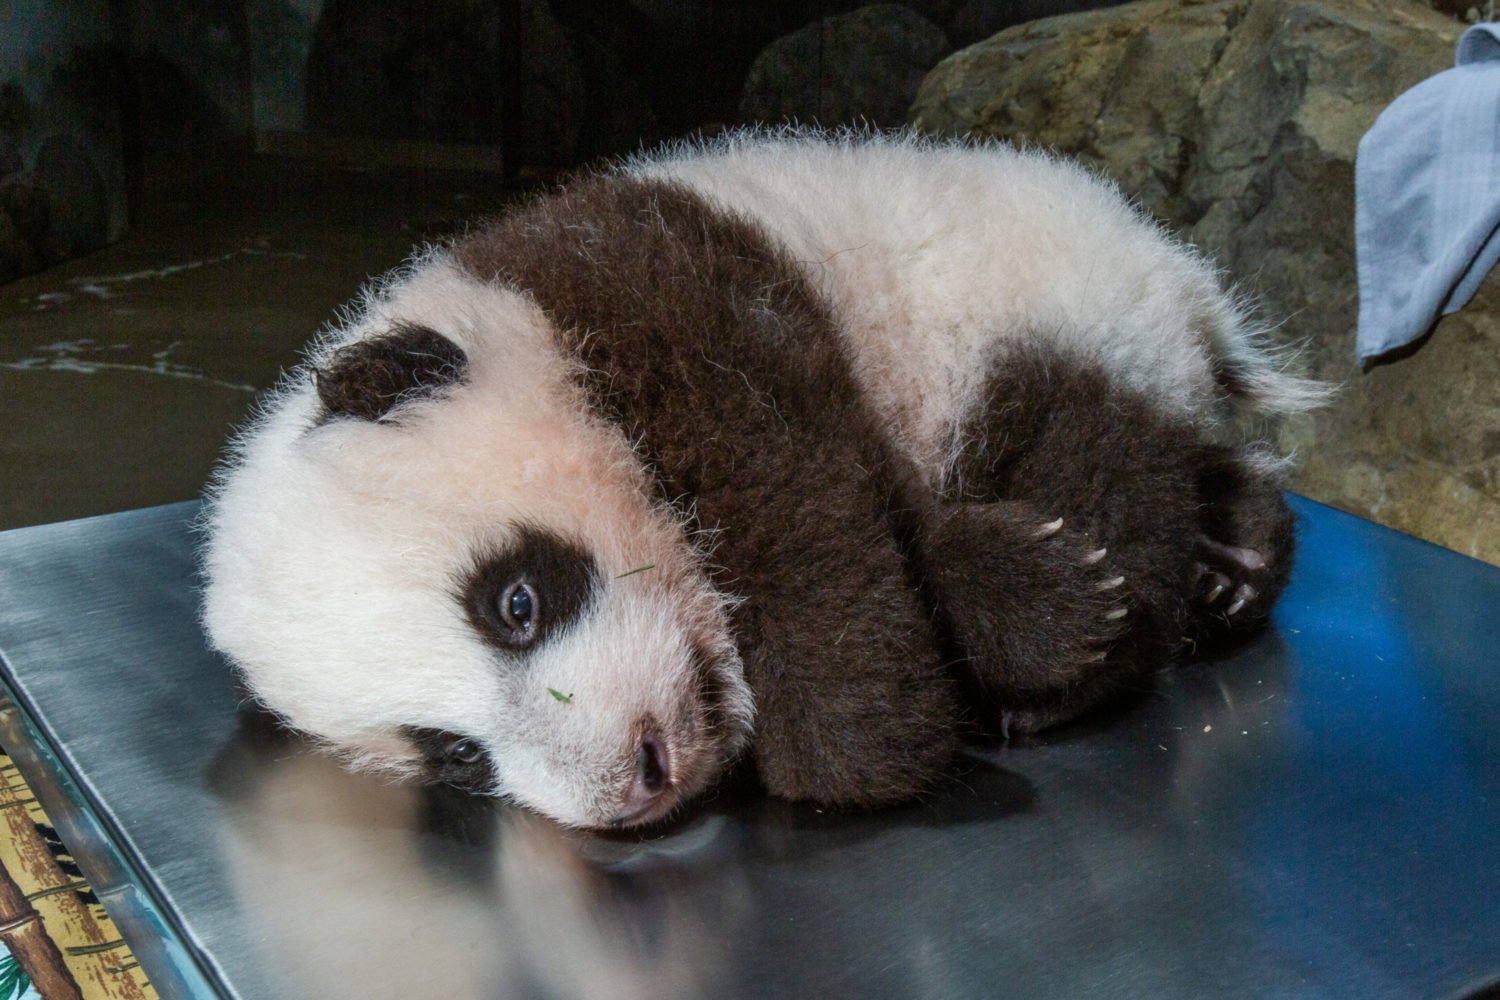 We've also been in the fetal position all week. Photo courtesy of Smithsonian National Zoo.